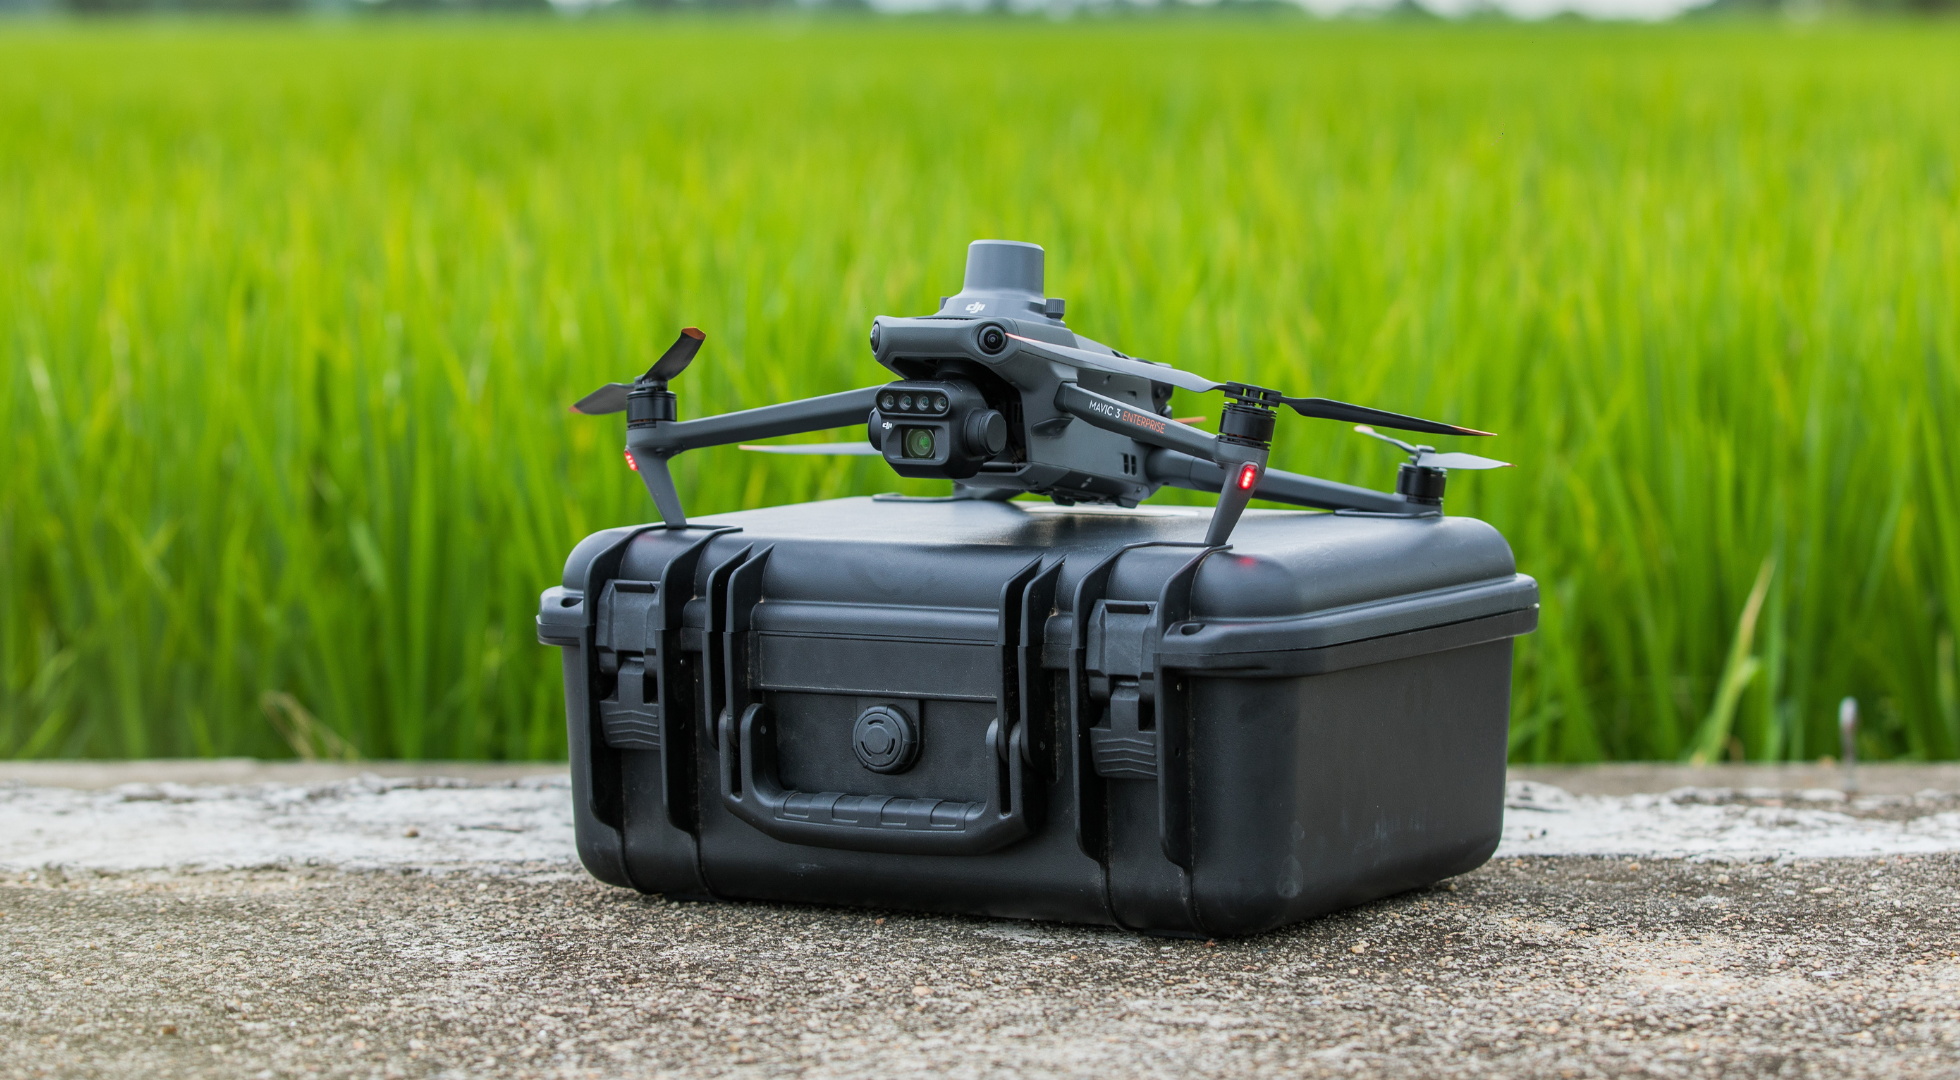 The Mavic 3 Multispectral is a lightweight, compact drone.